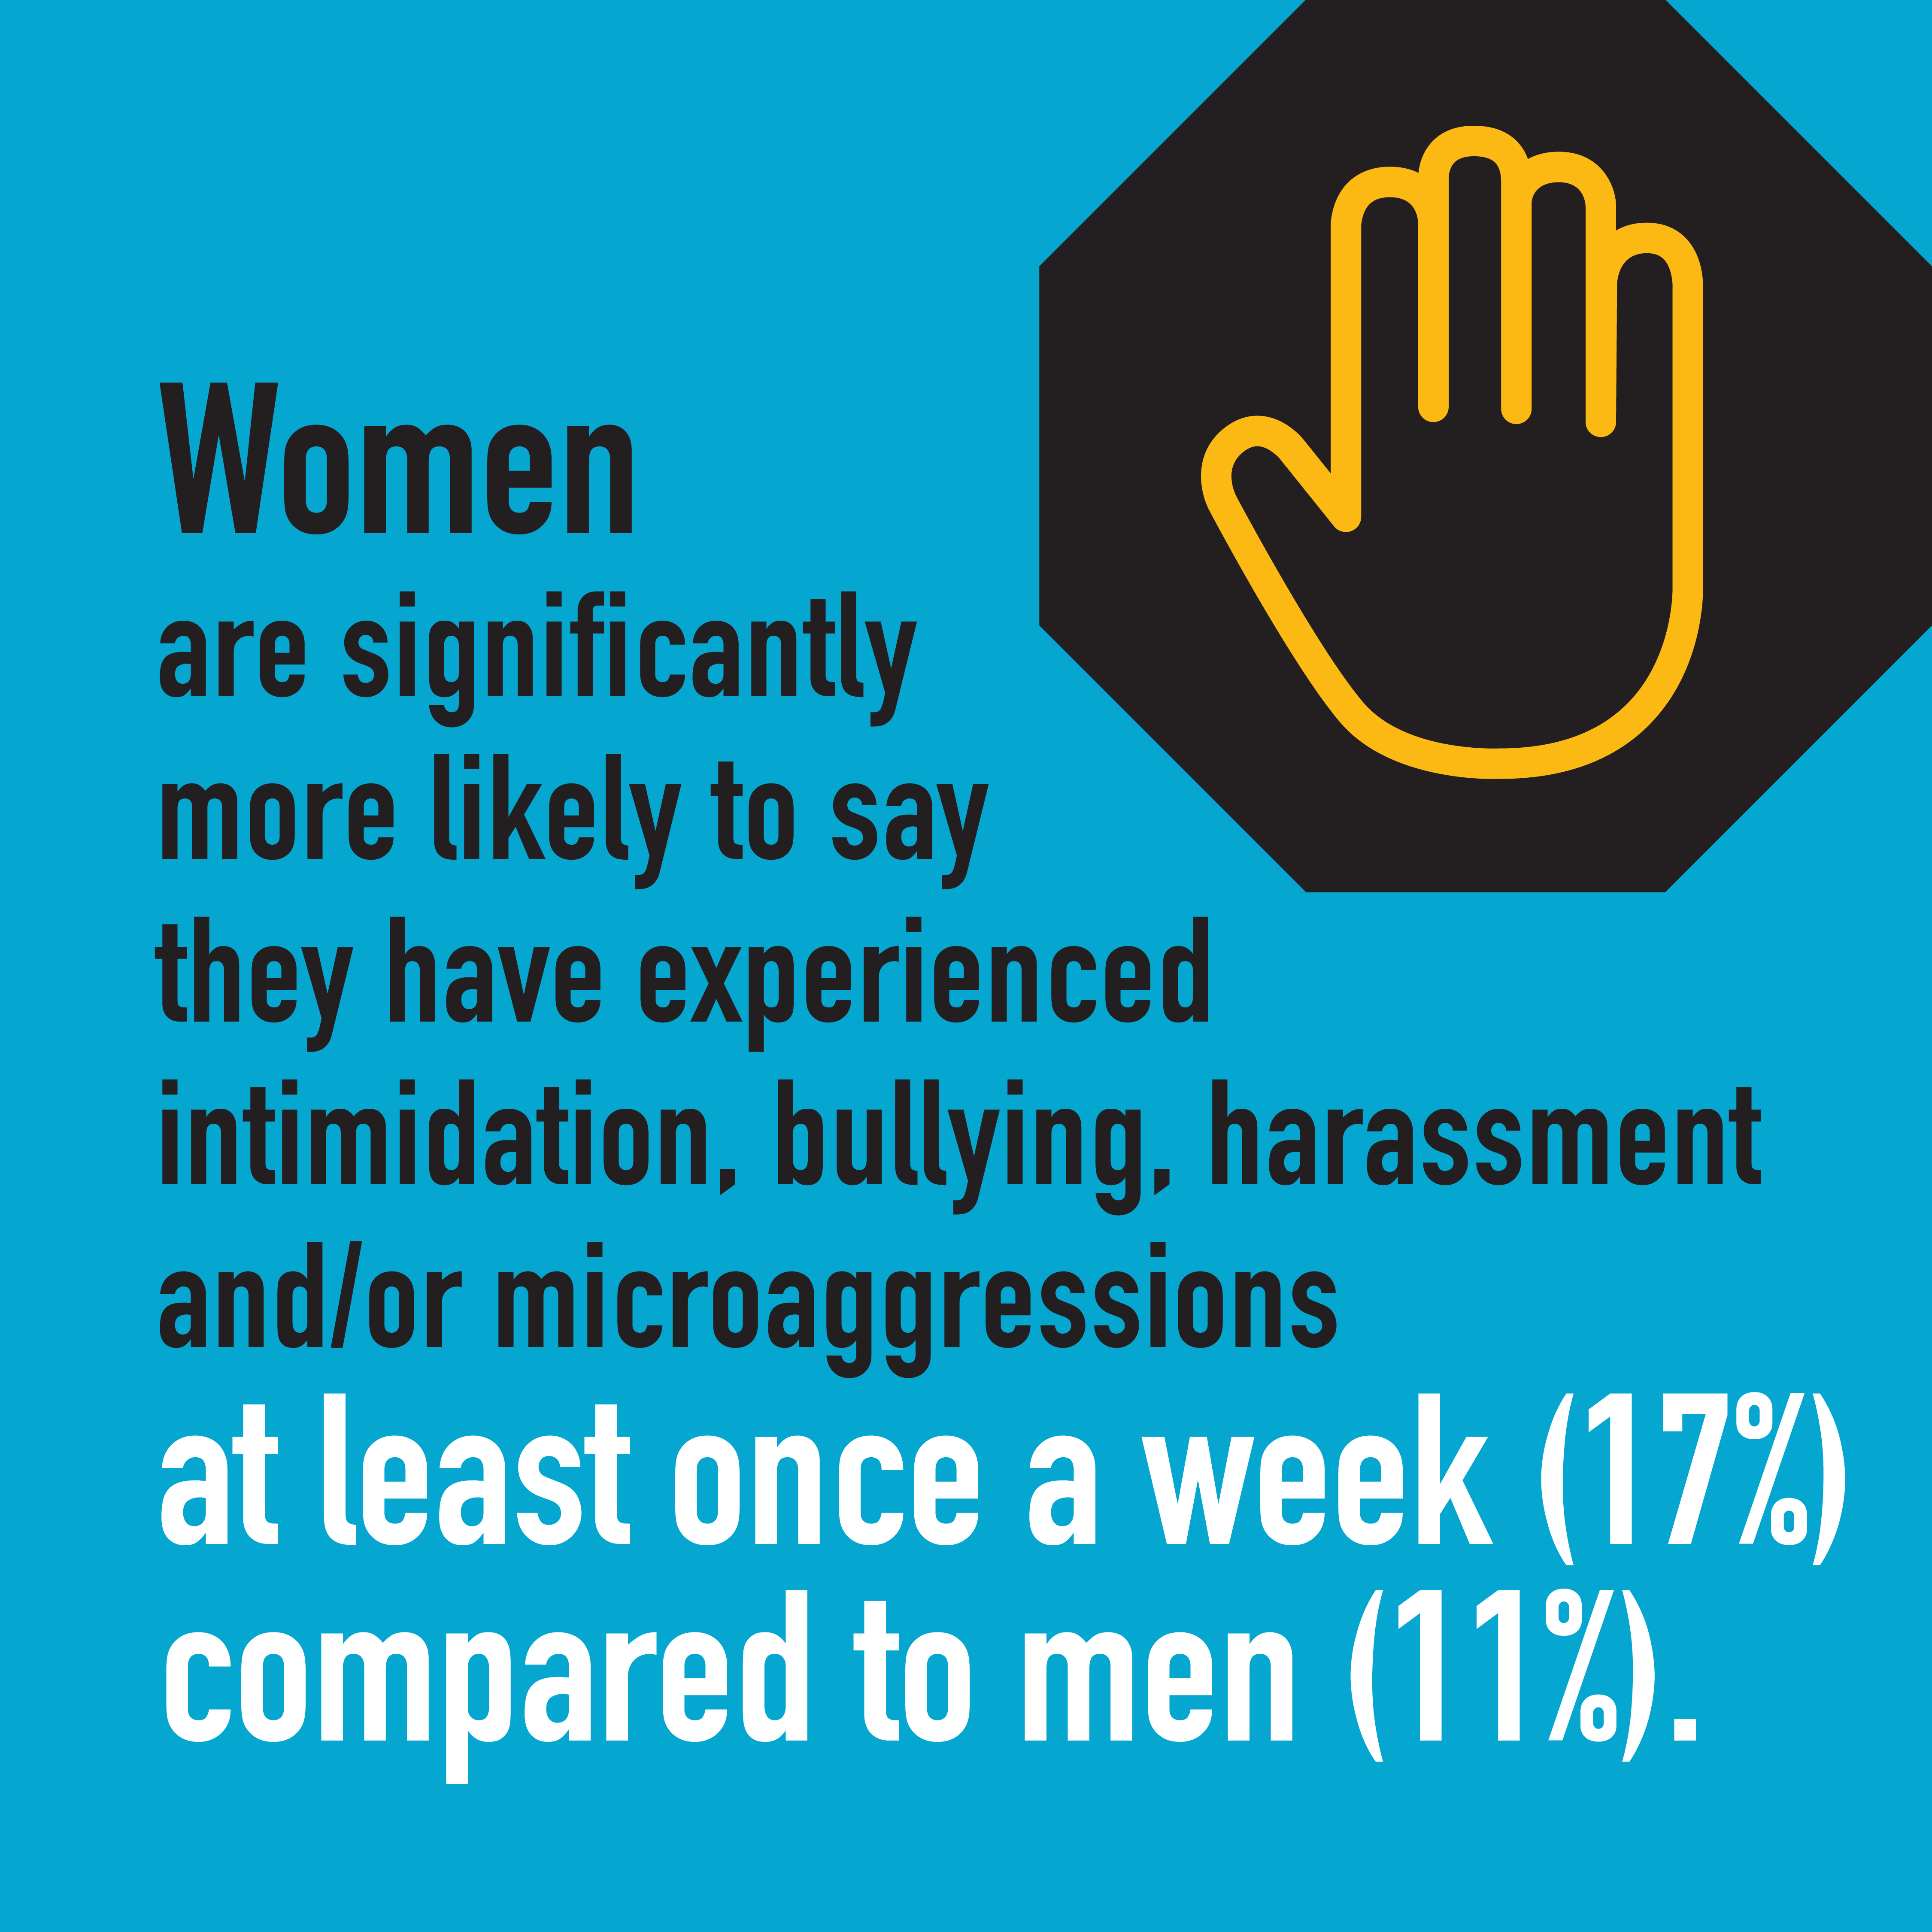 Women are significantly more likely to say they have experienced intimidation, bullying, harassment and/or microaggressions at least once a week (17%) compared to men(11%)